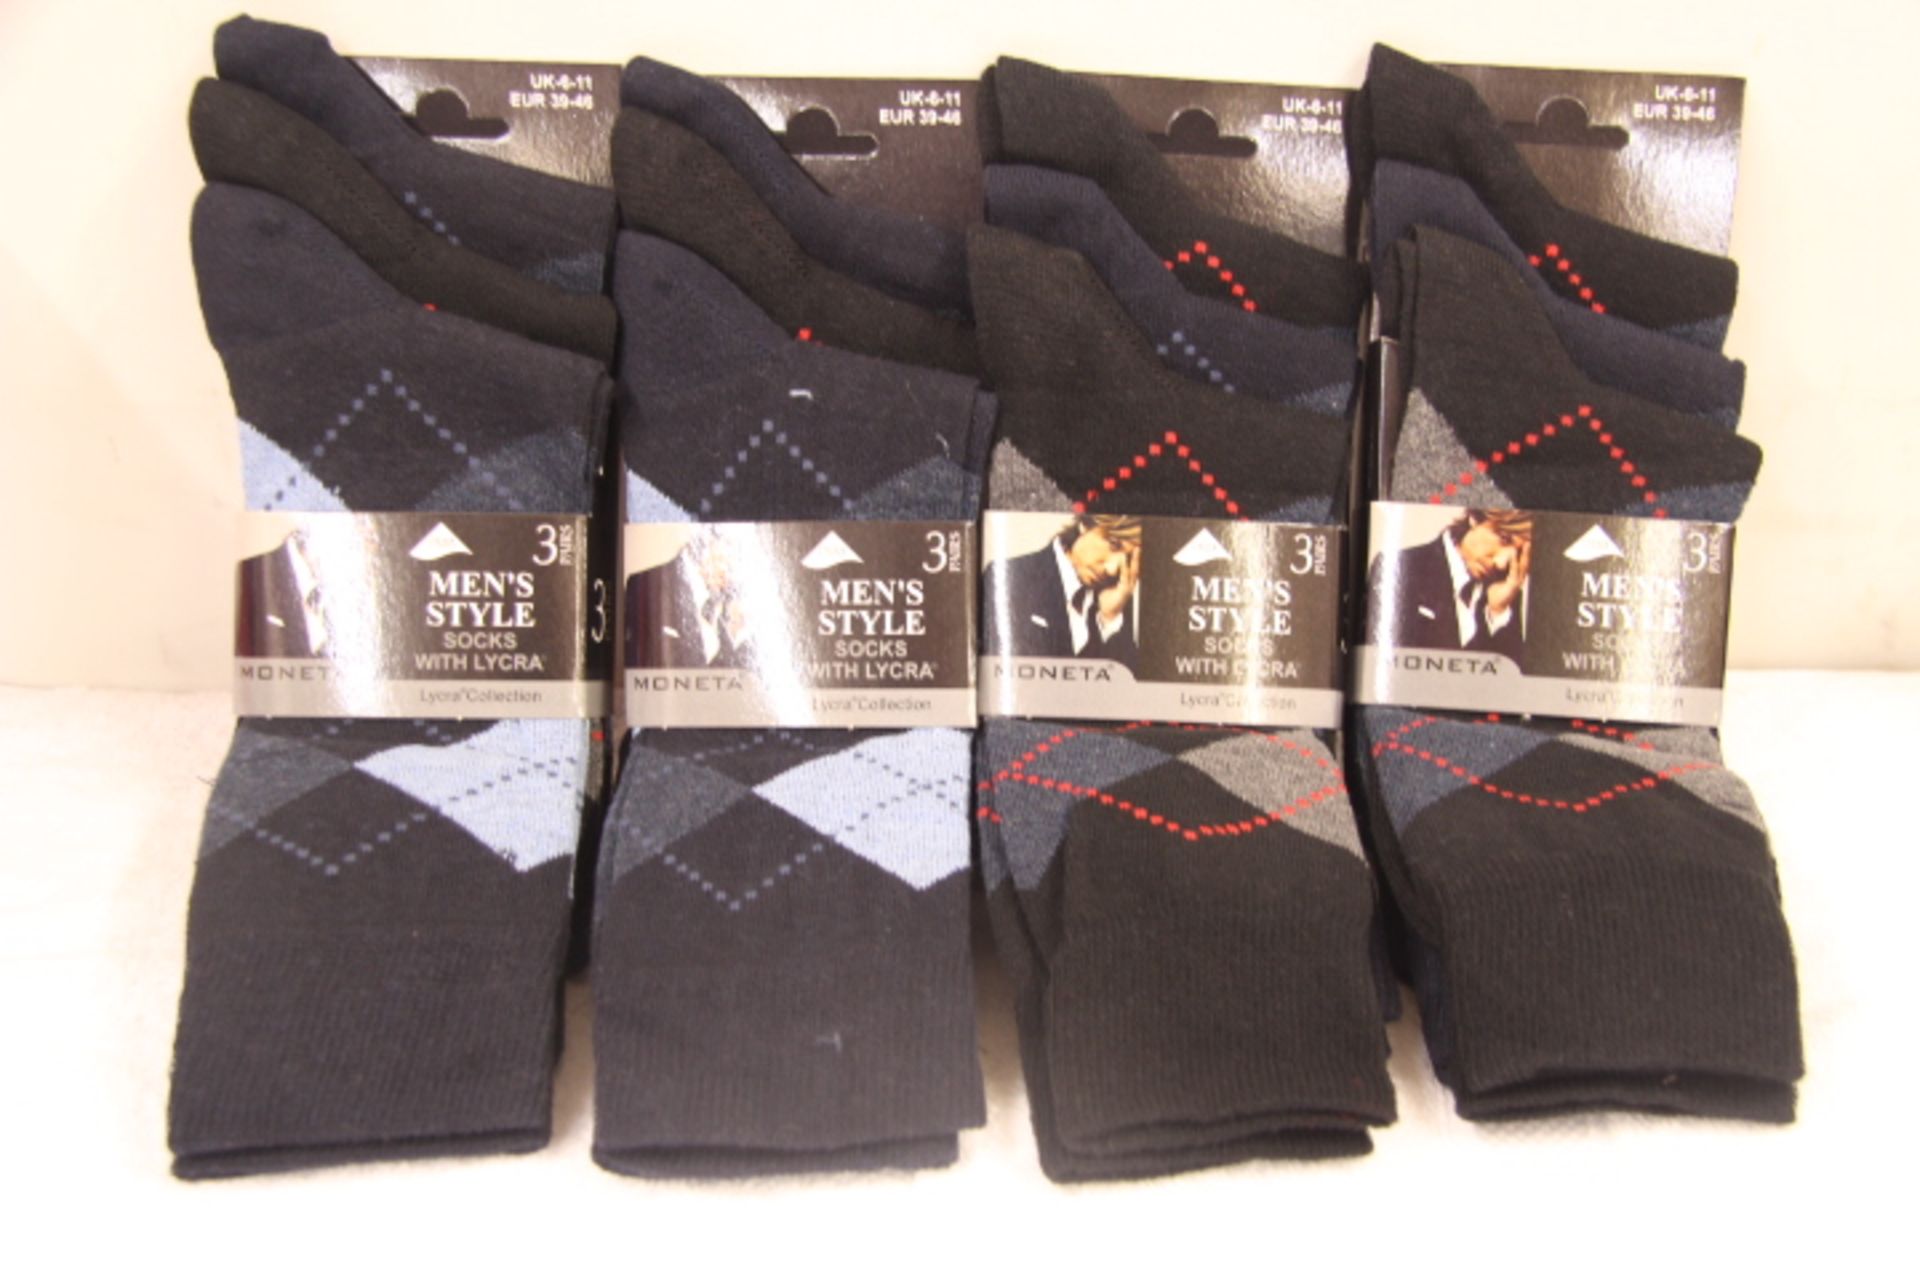 V Brand New A Lot Of Twelve Pairs Gents Argyle Socks Size 6-11 X 2 YOUR BID PRICE TO BE MULTIPLIED